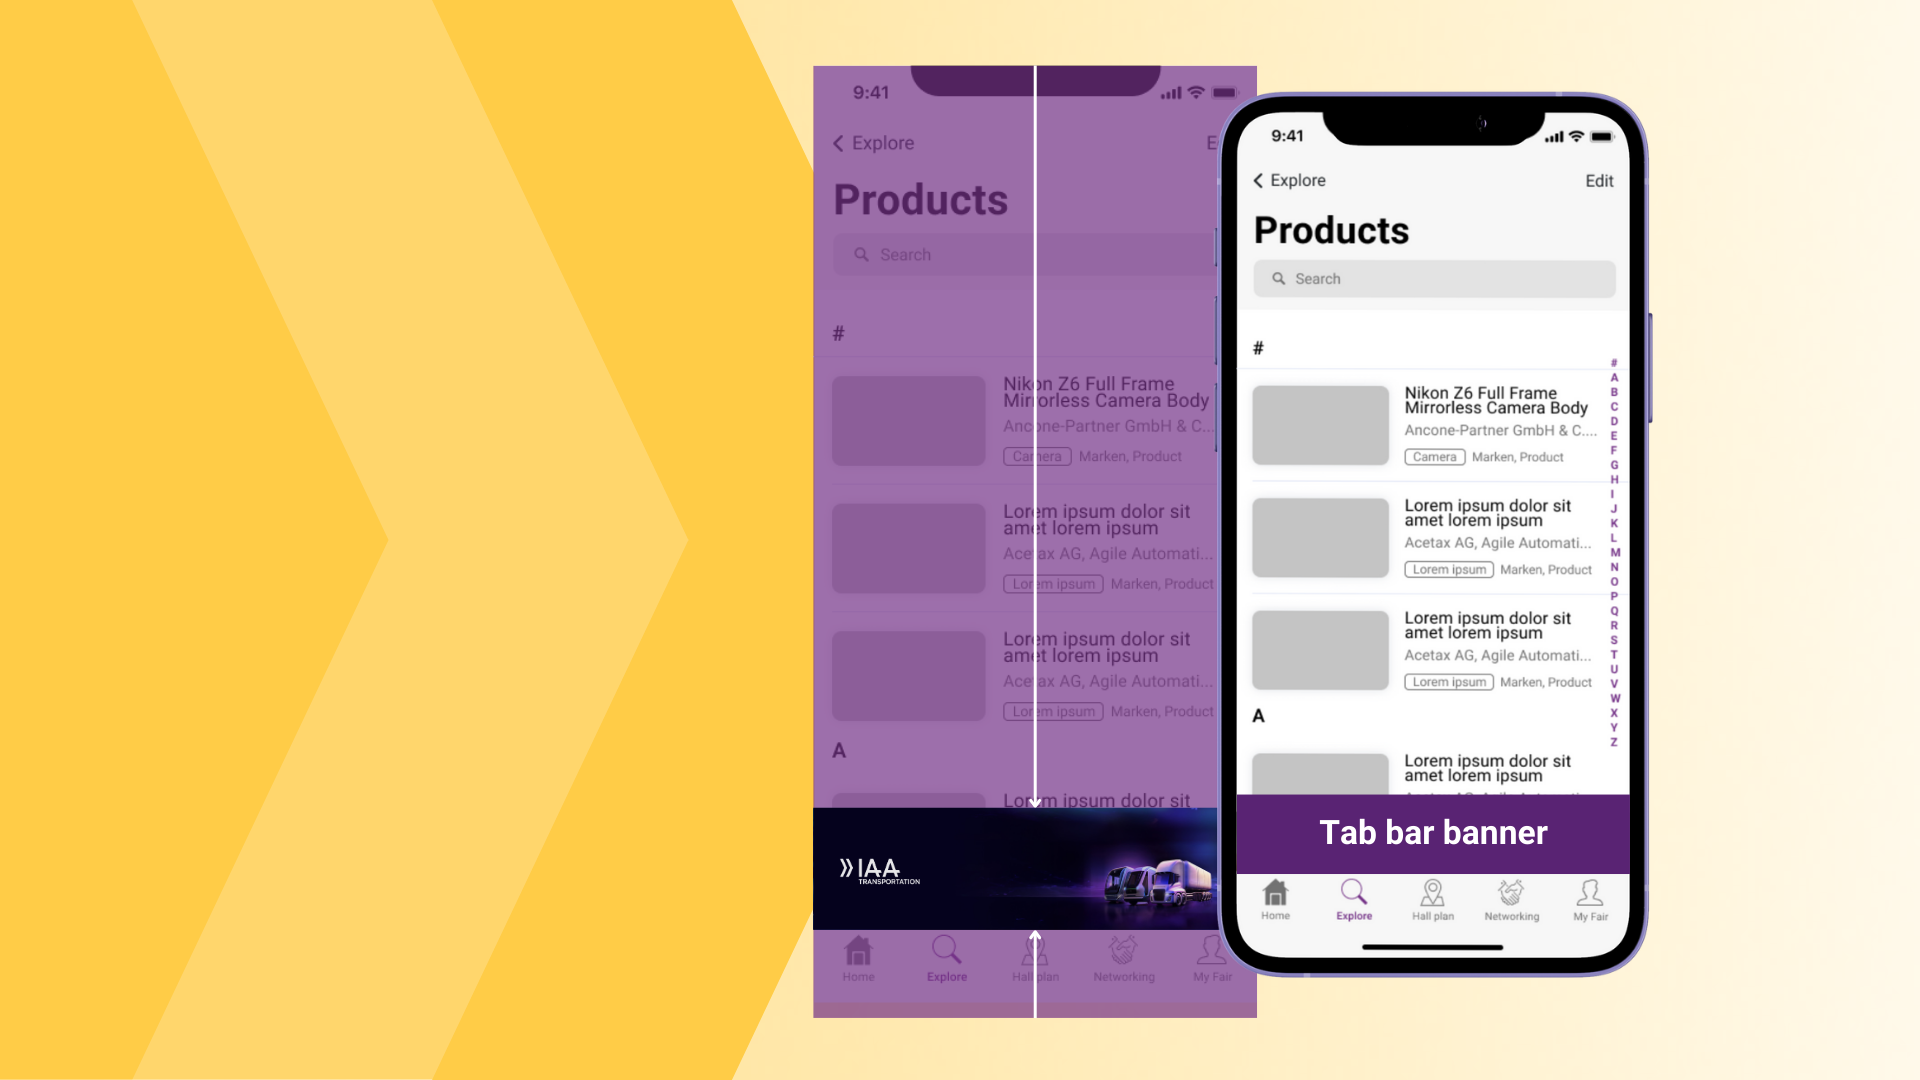 Tab bar banner (products A-Z)